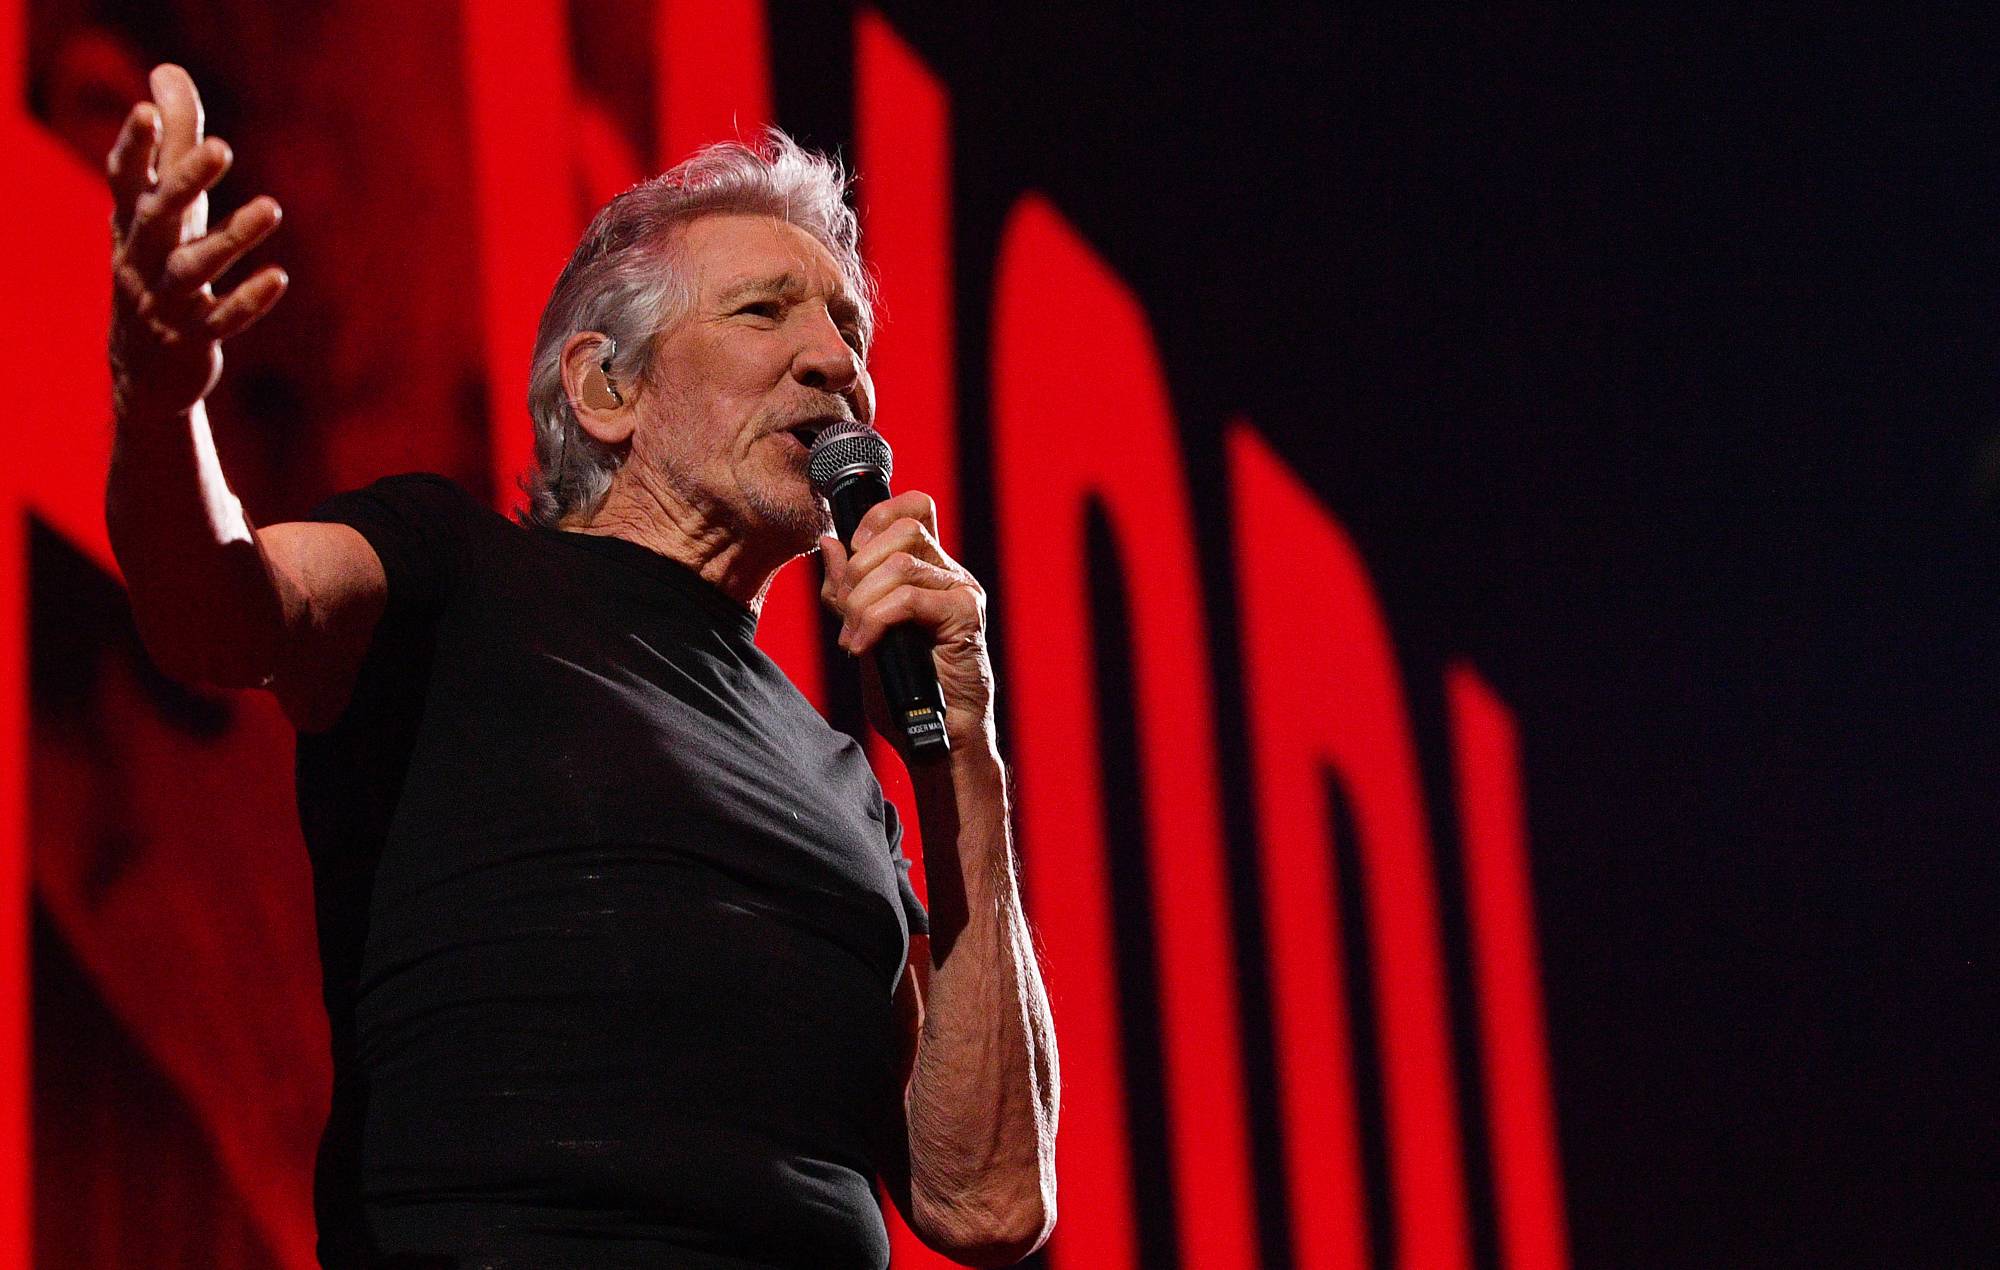 Roger Waters hits out at documentary portraying him as anti-Semitic